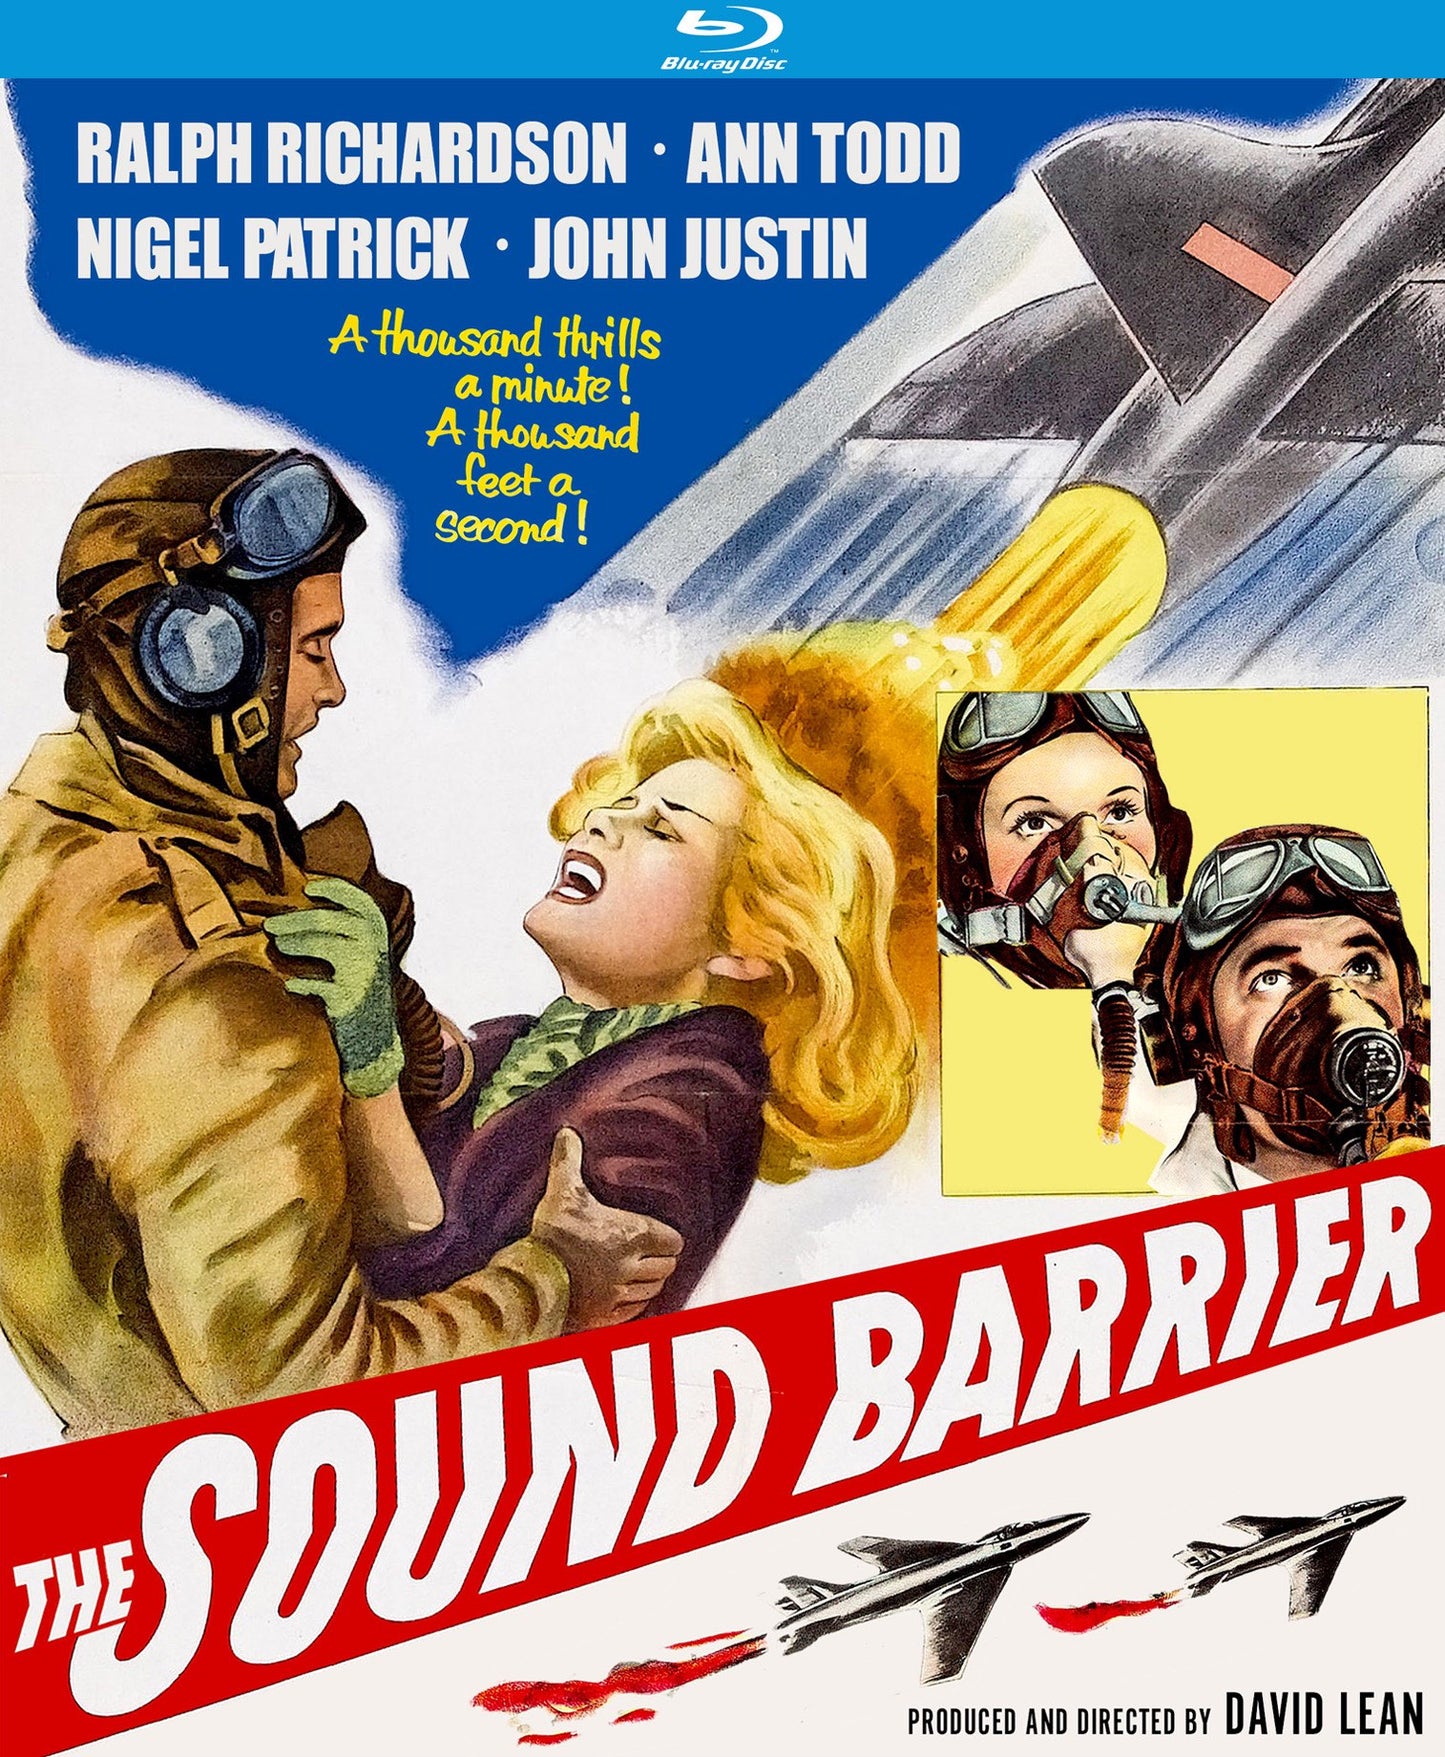 Sound Barrier [Blu-ray] cover art